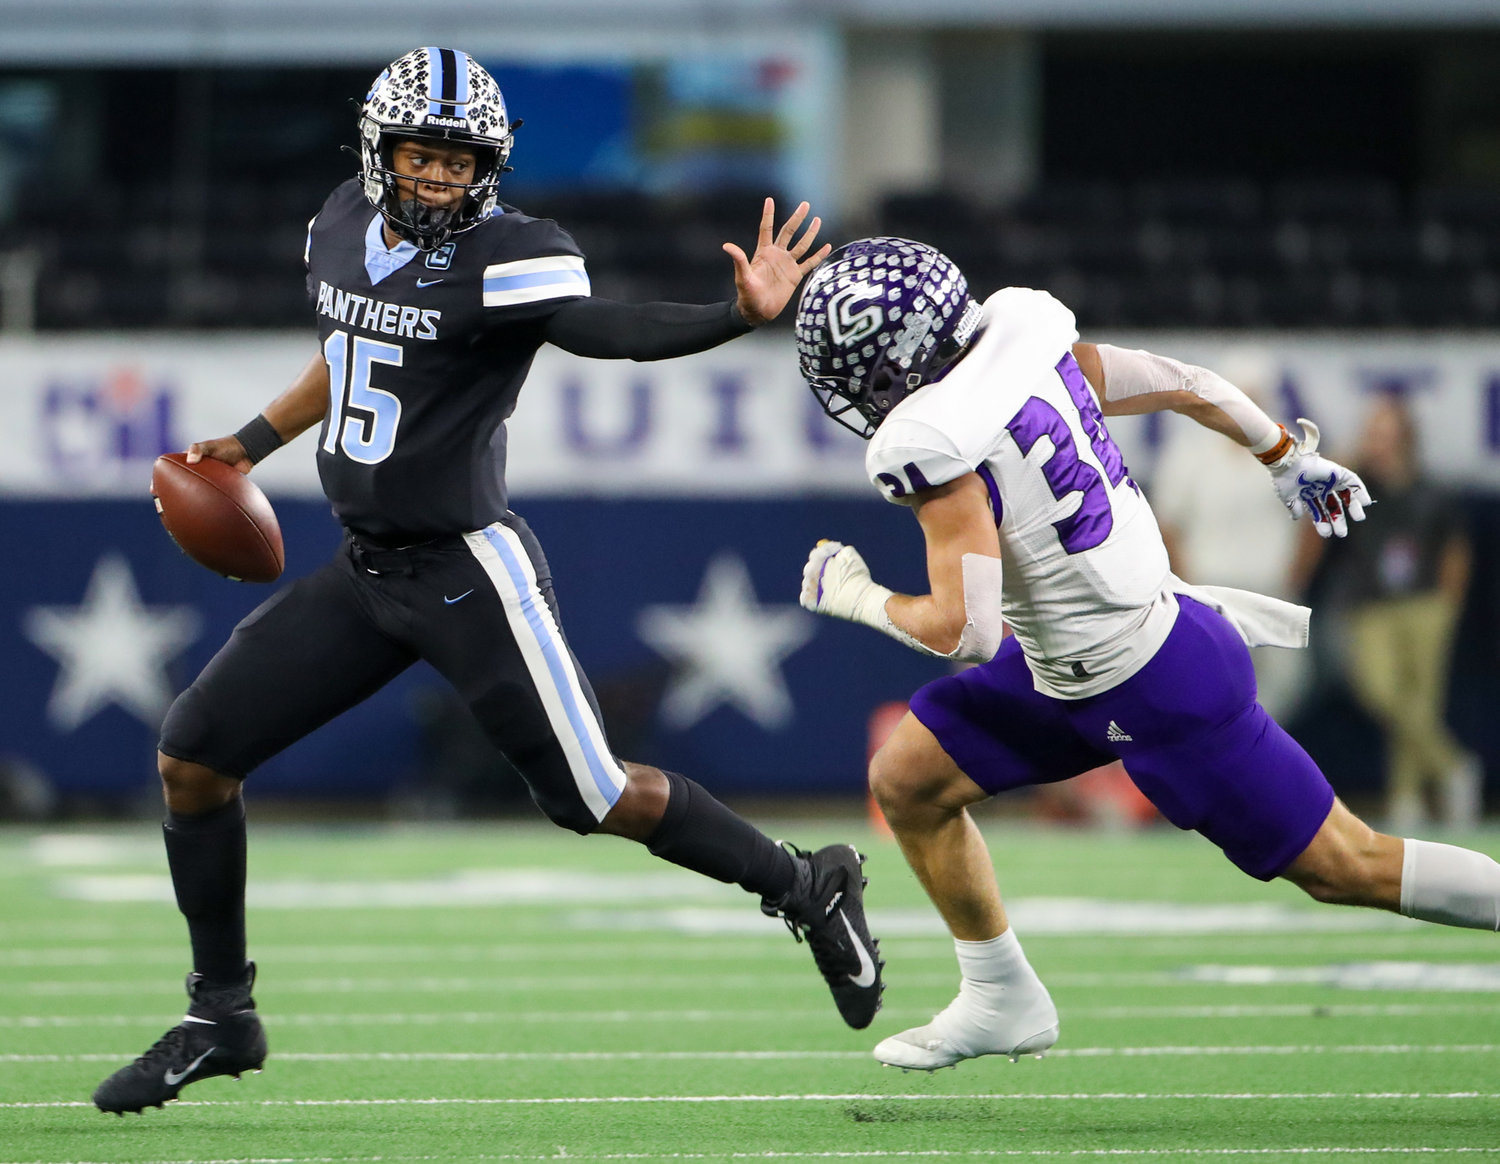 Paetow Panthers quarterback C.J. Dumas Jr.  (15) delvers a stiff arm to College Station Cougars linebacker Jaxson Slanker (34) on a carry during the Class 5A-Division I state football championship game between Paetow and College Station on December 17, 2021 in Arlington, Texas.